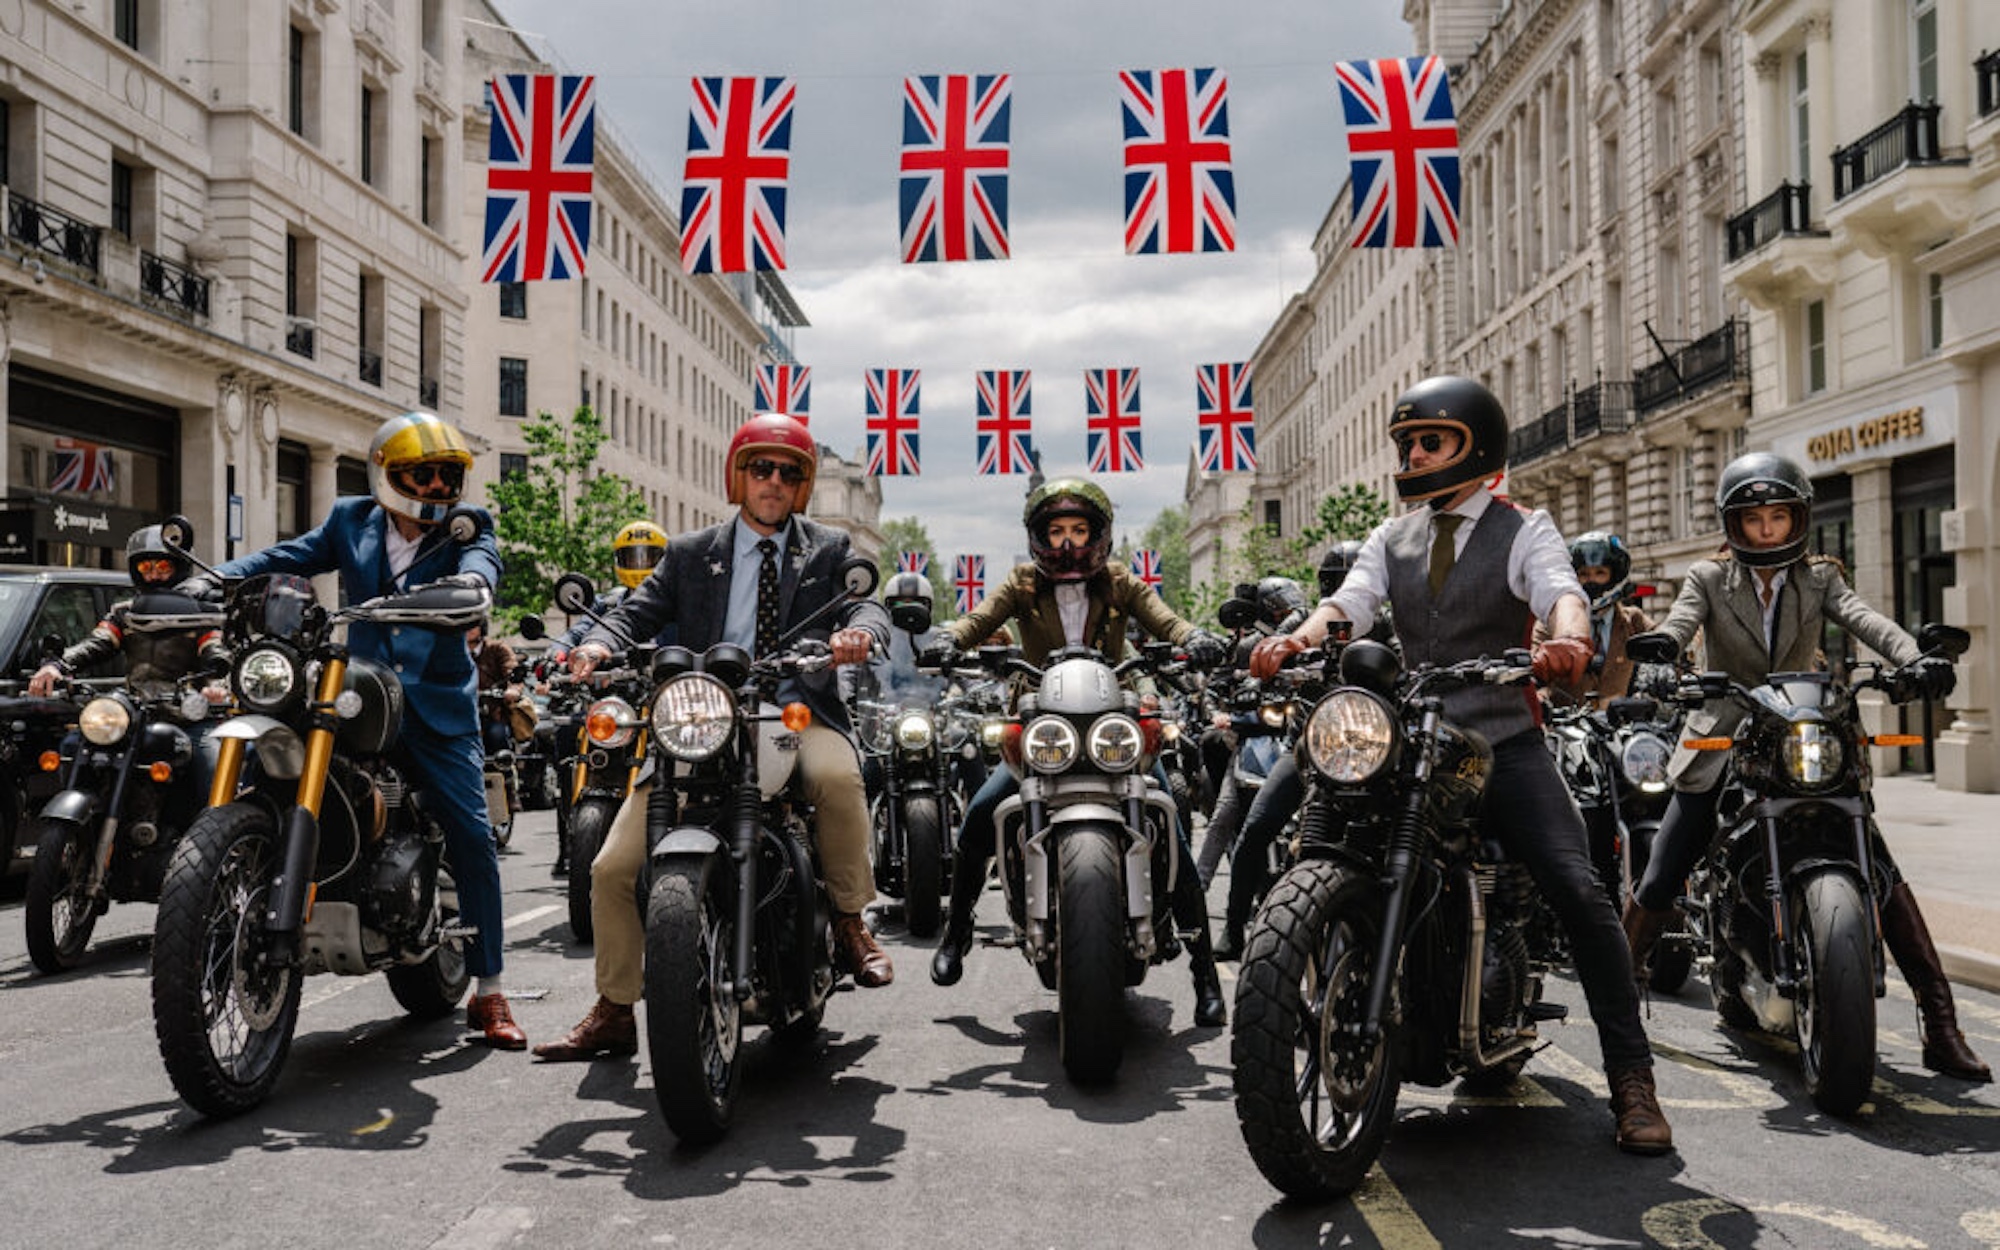 A group of British motorcyclists.